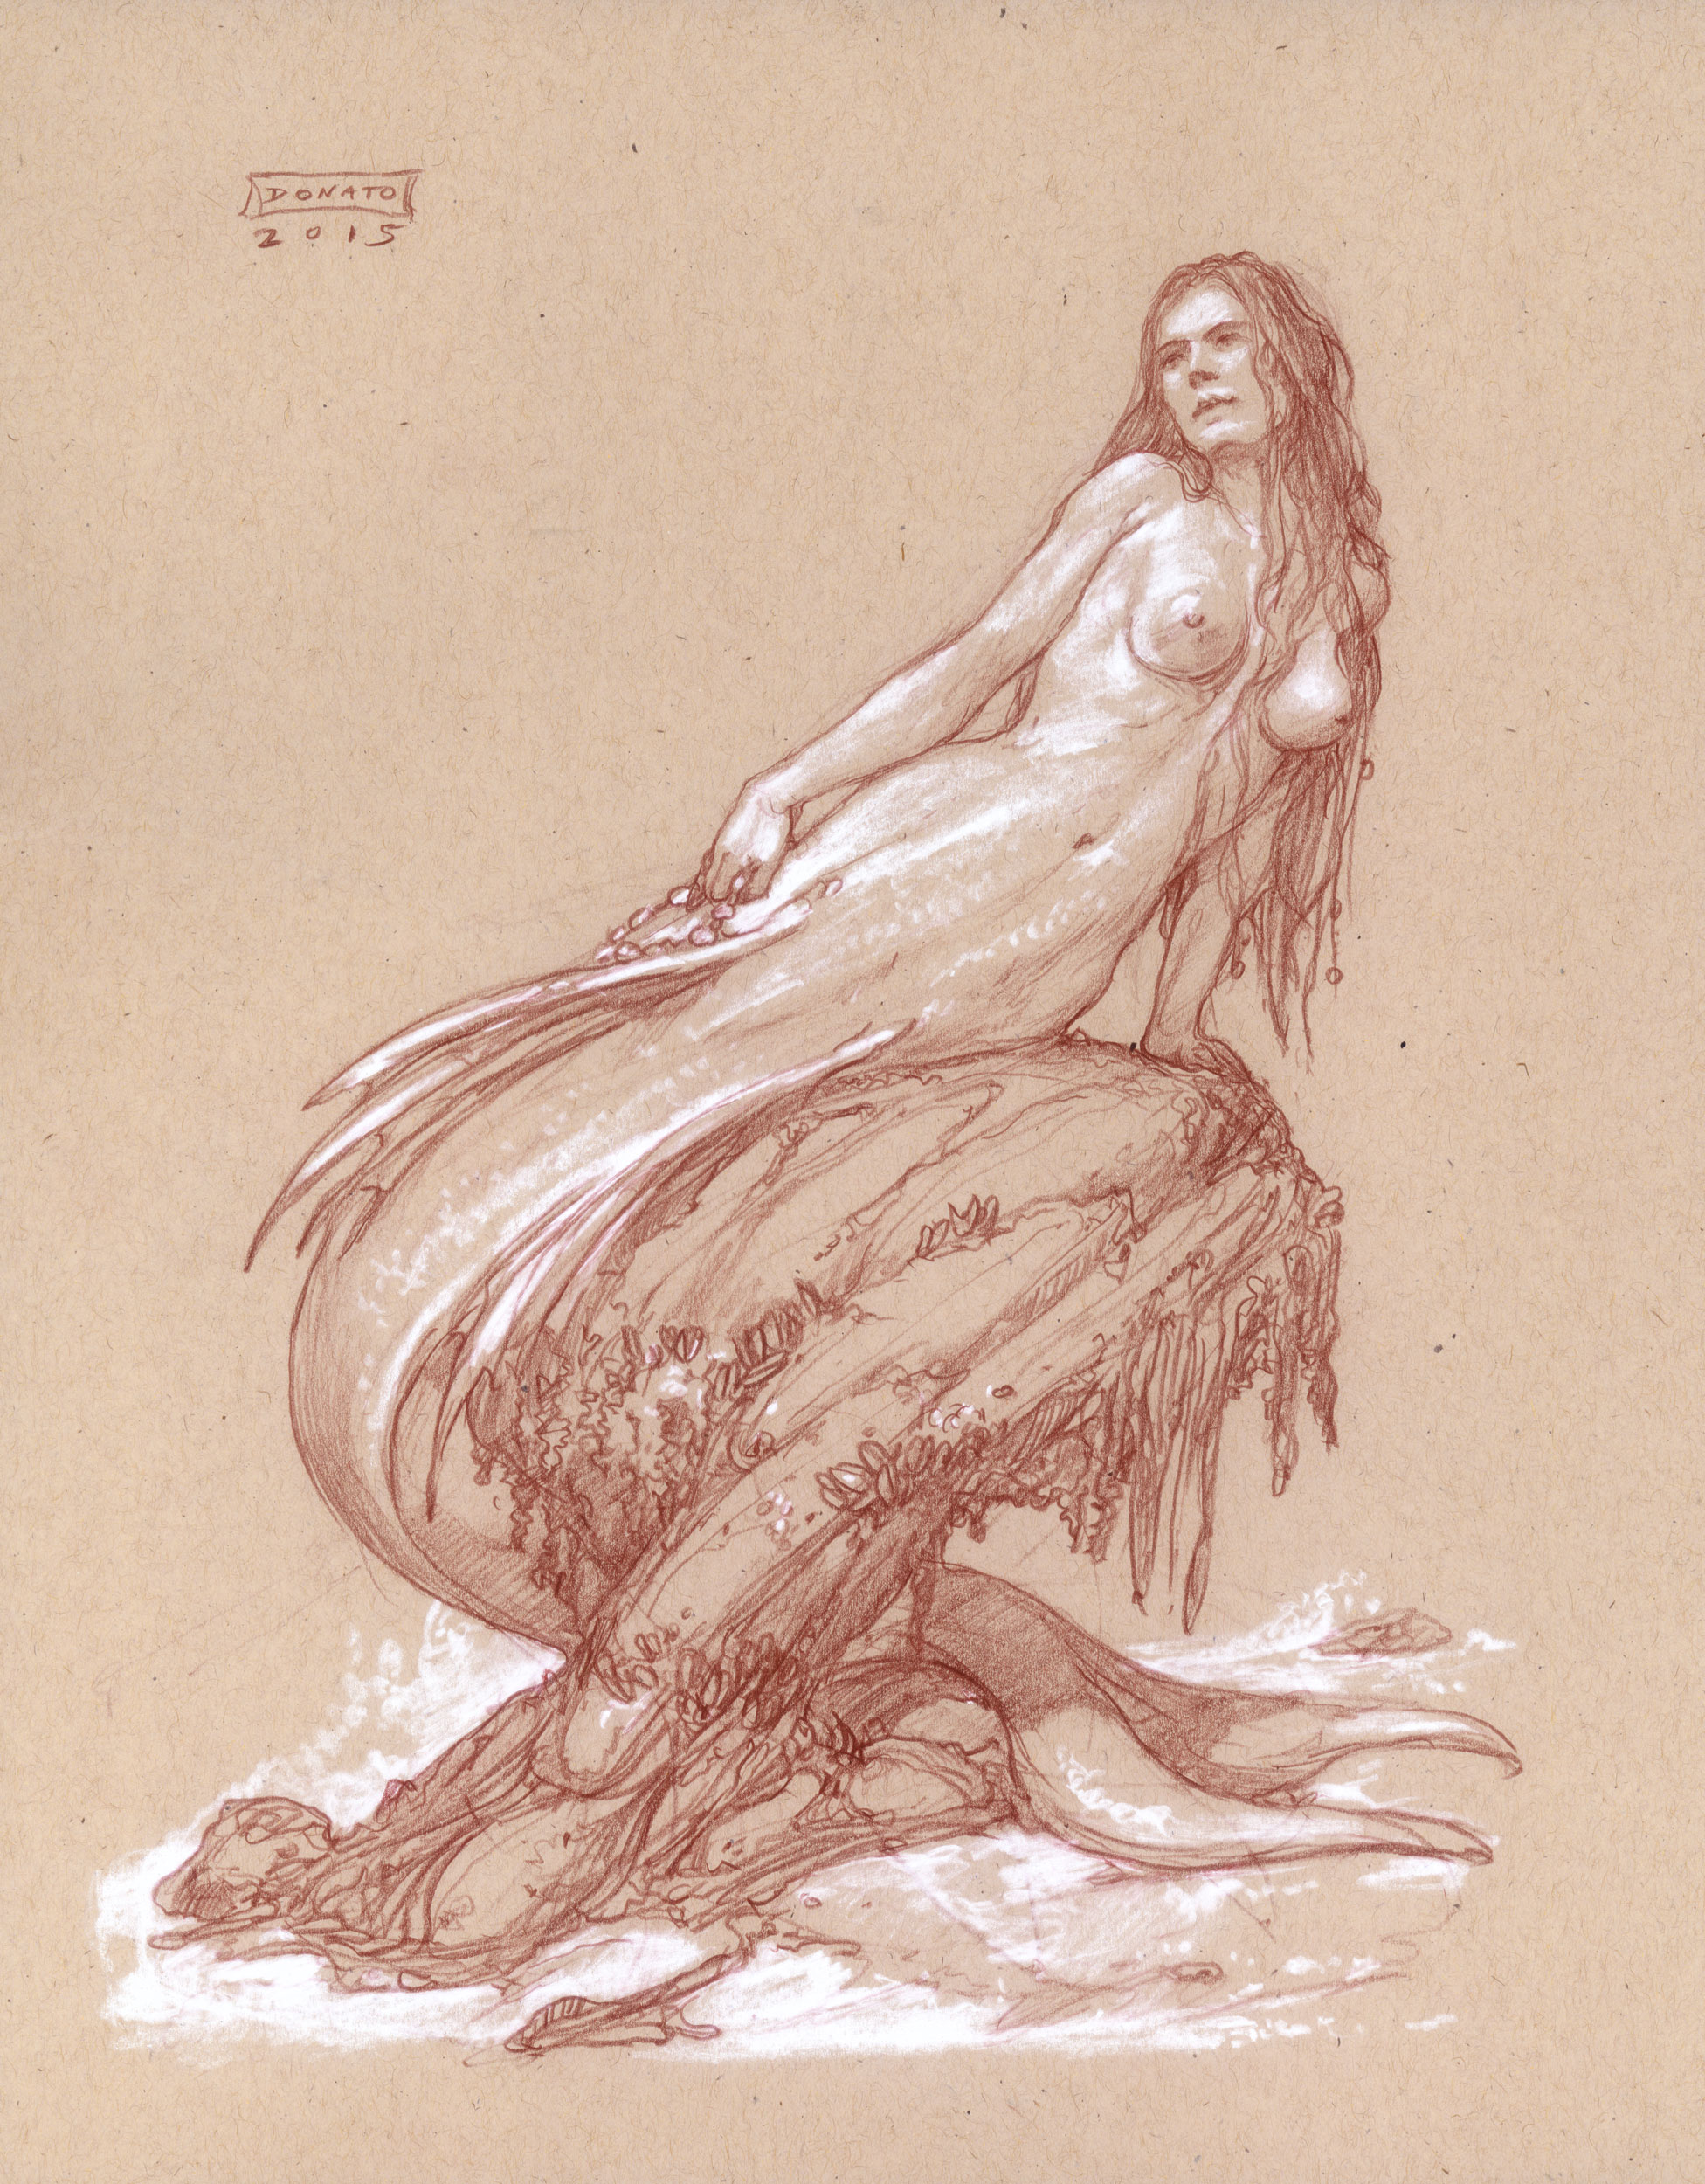 Mermaid - Treasure Seeker
14" x 11" watercolor pencil and chalk  on toned paper 2015
original available in website store